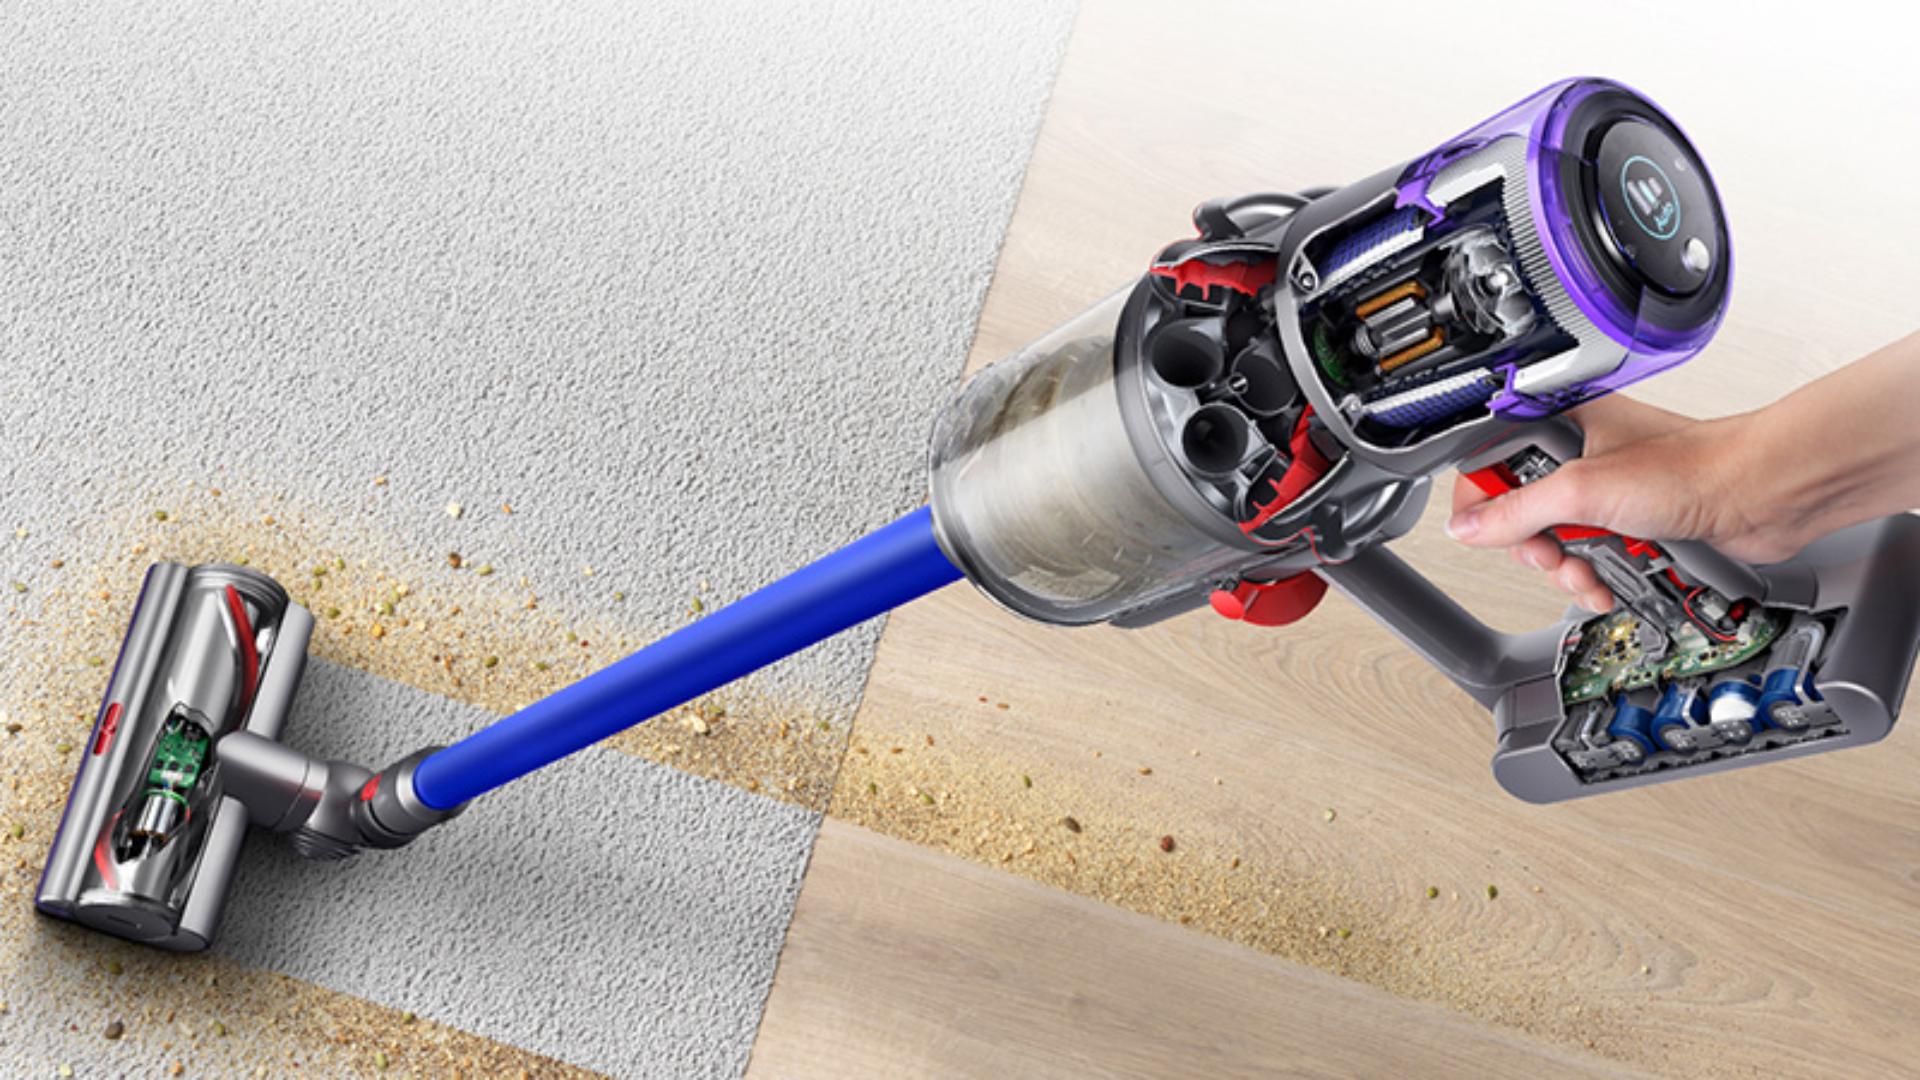 Dyson V11 vaccum cleaner lifting dirt from carpet